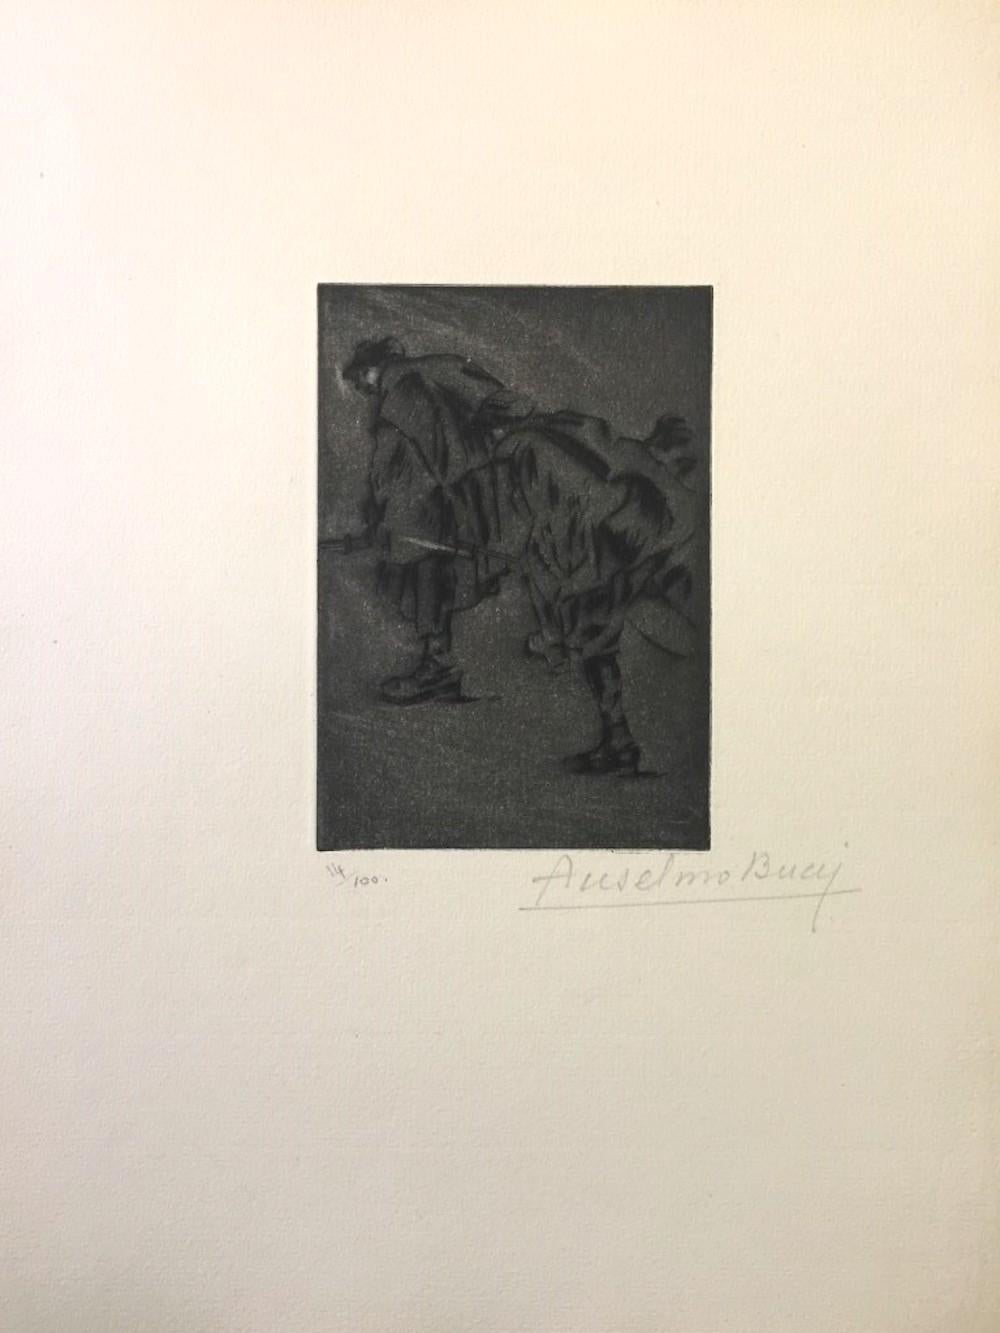 Image dimensions: 13.5 x 9.5 cm.

Hand signed. Edition of 100 prints on Hollande paper. From the collection: “Croquis du Front Italien” , published in Paris by D'Alignan editions. Anselmo Bucci was an Italian painter and printmaker.

He took part in